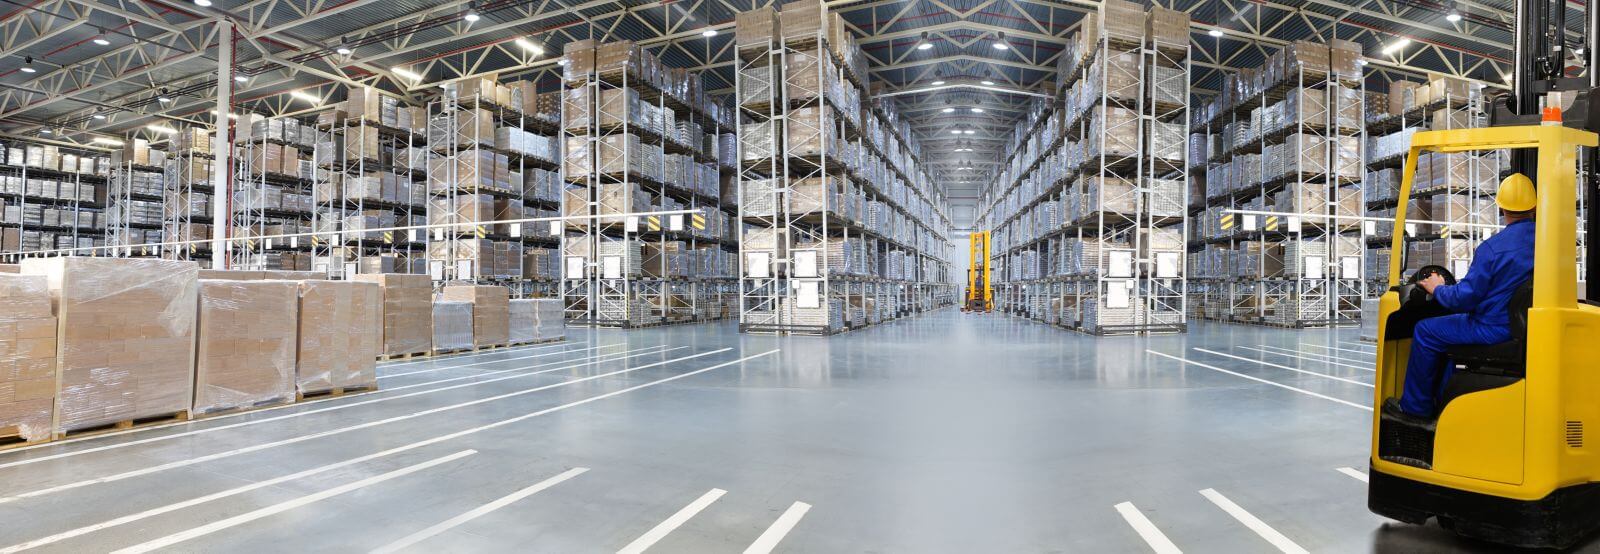 S, M, L, XL, XXL - Cooling Solutions for Warehouses of all sizes